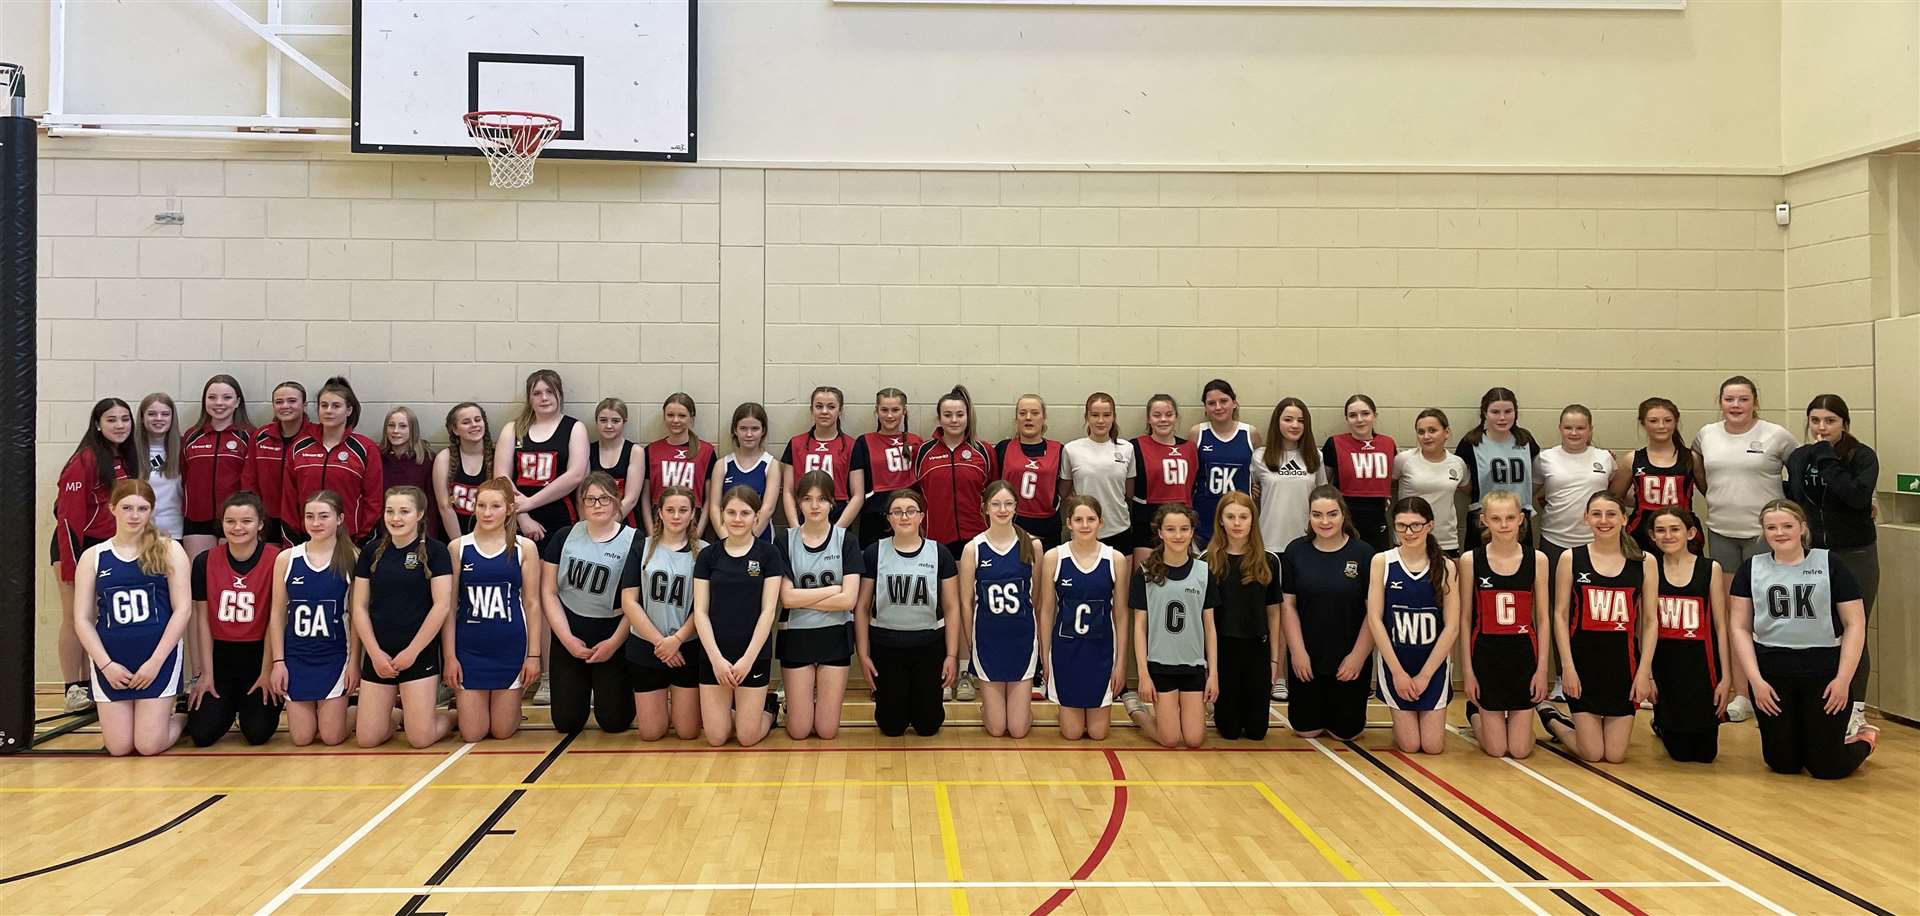 All six teams from the four schools at the netball festival in Kirkwall Grammar School, with Thurso in black and red and Wick in blue.